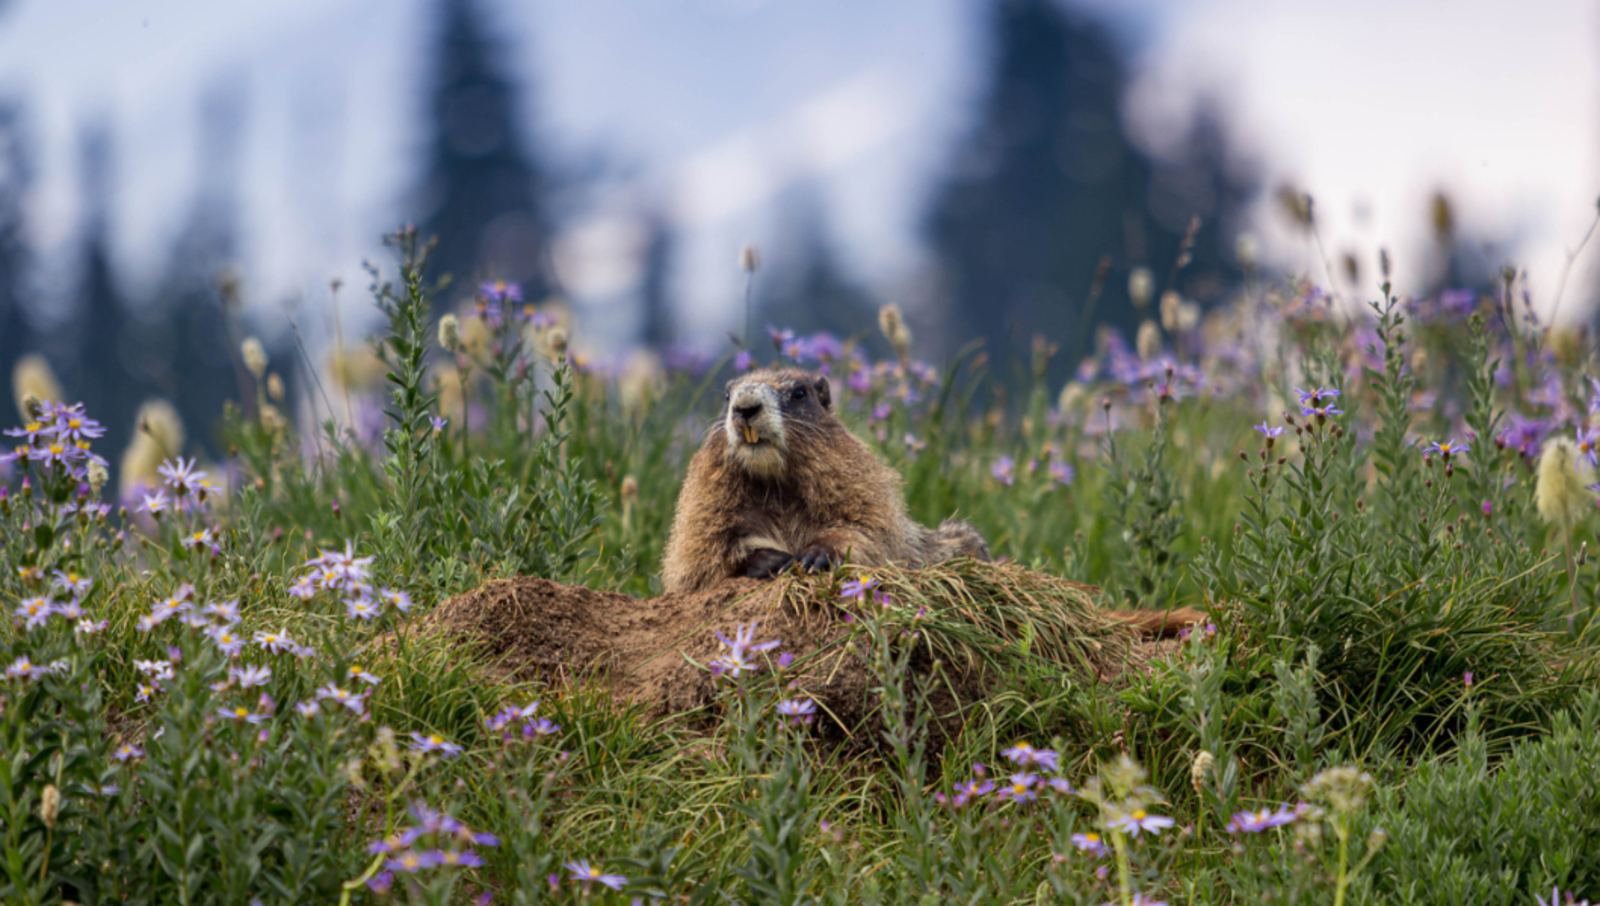 Groundhog leaning on log in meadow with purple flowers 